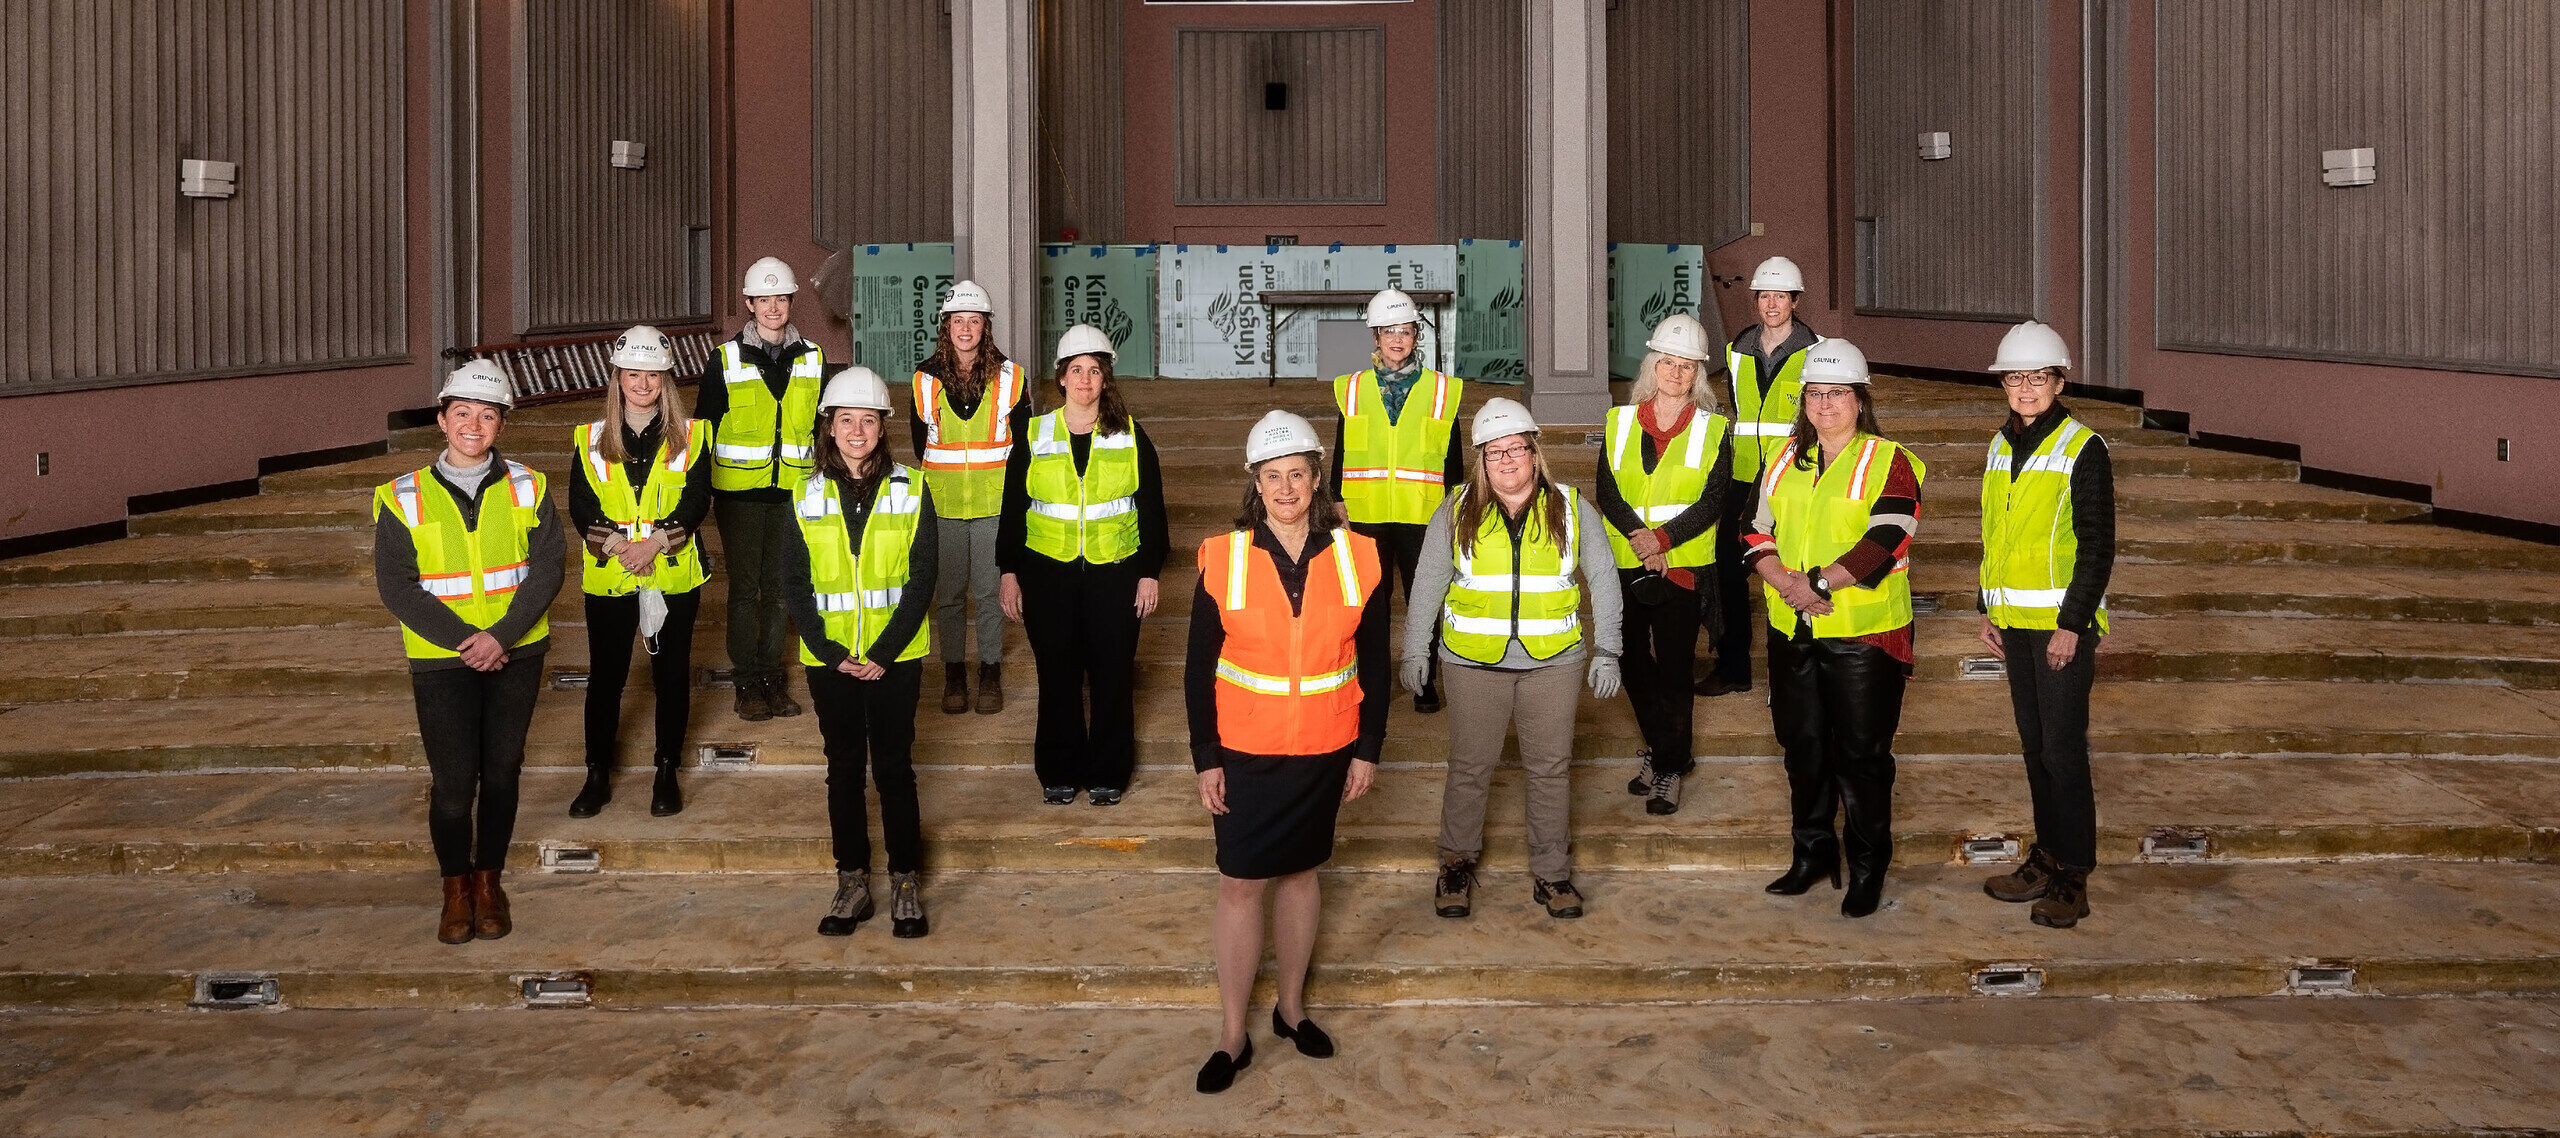 A group of thirteen women with a light skin tone of all ages wearing yellow safety vests and white safety helmets, smiling toward the camera. They are standing on a construction site with unfinished floors and building materials leaning on the walls in the back. One woman in the middle is wearing an orange safety vest, standing apart from the other women.